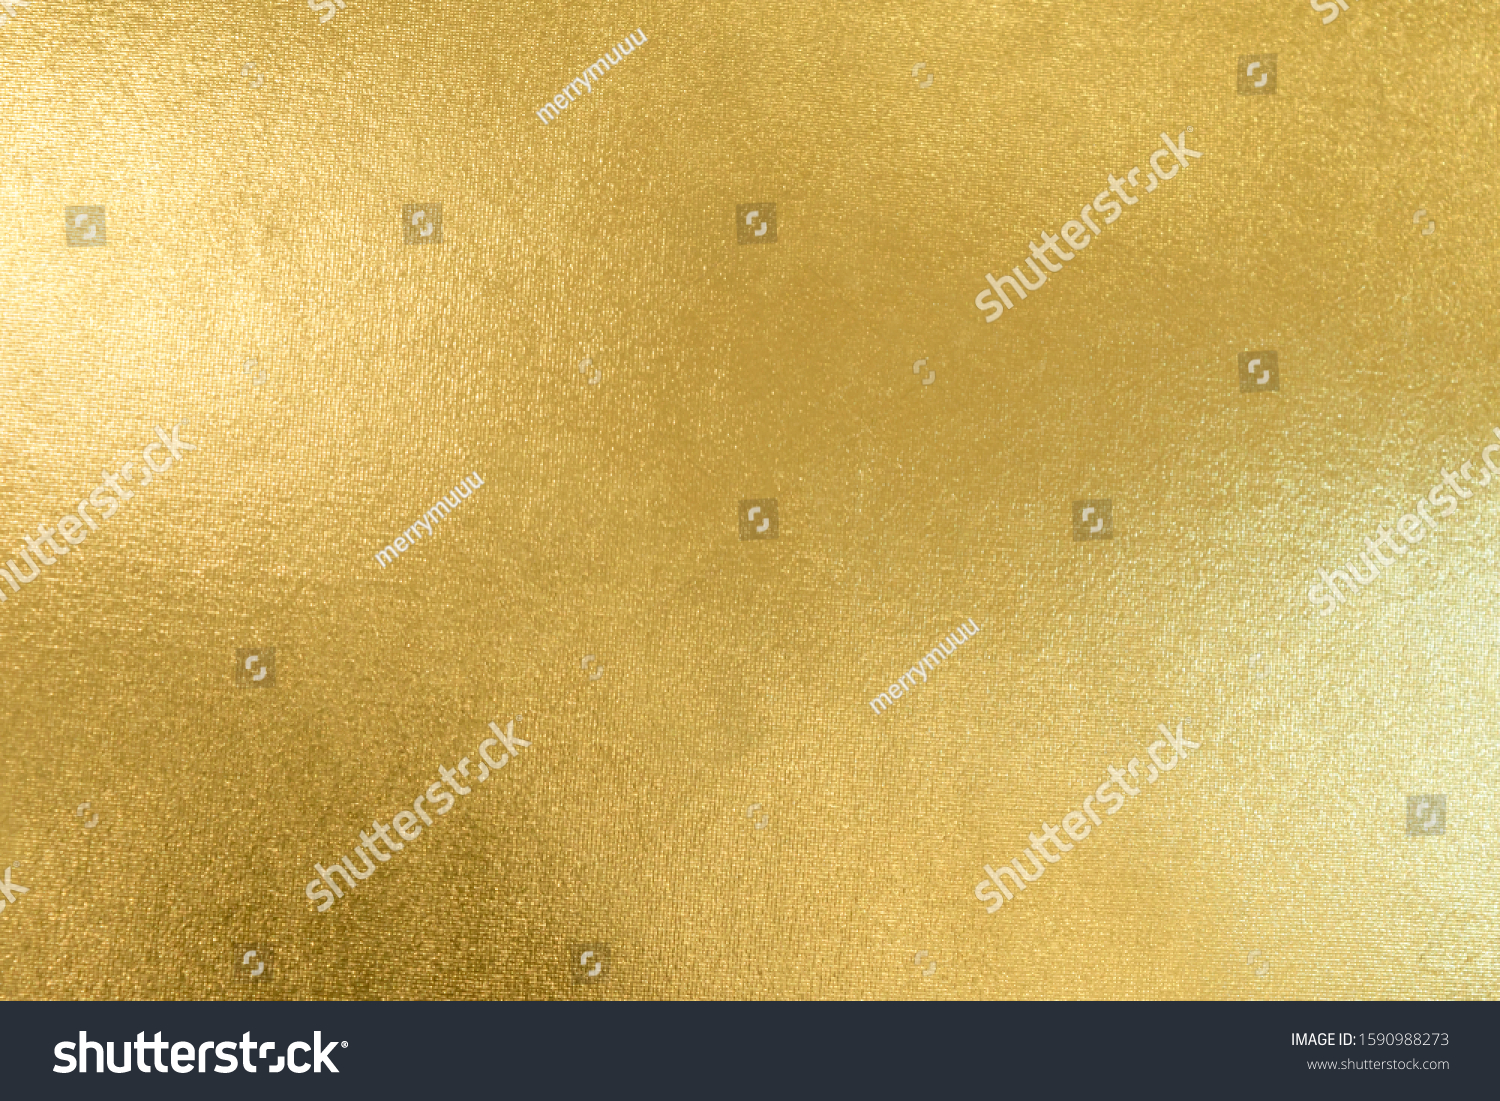 Gold texture background with yellow luxury shiny shine glitter sparkle of bright light reflection on golden surface, for celebration backdrop, wallpaper, Christmas decoration background or any design #1590988273